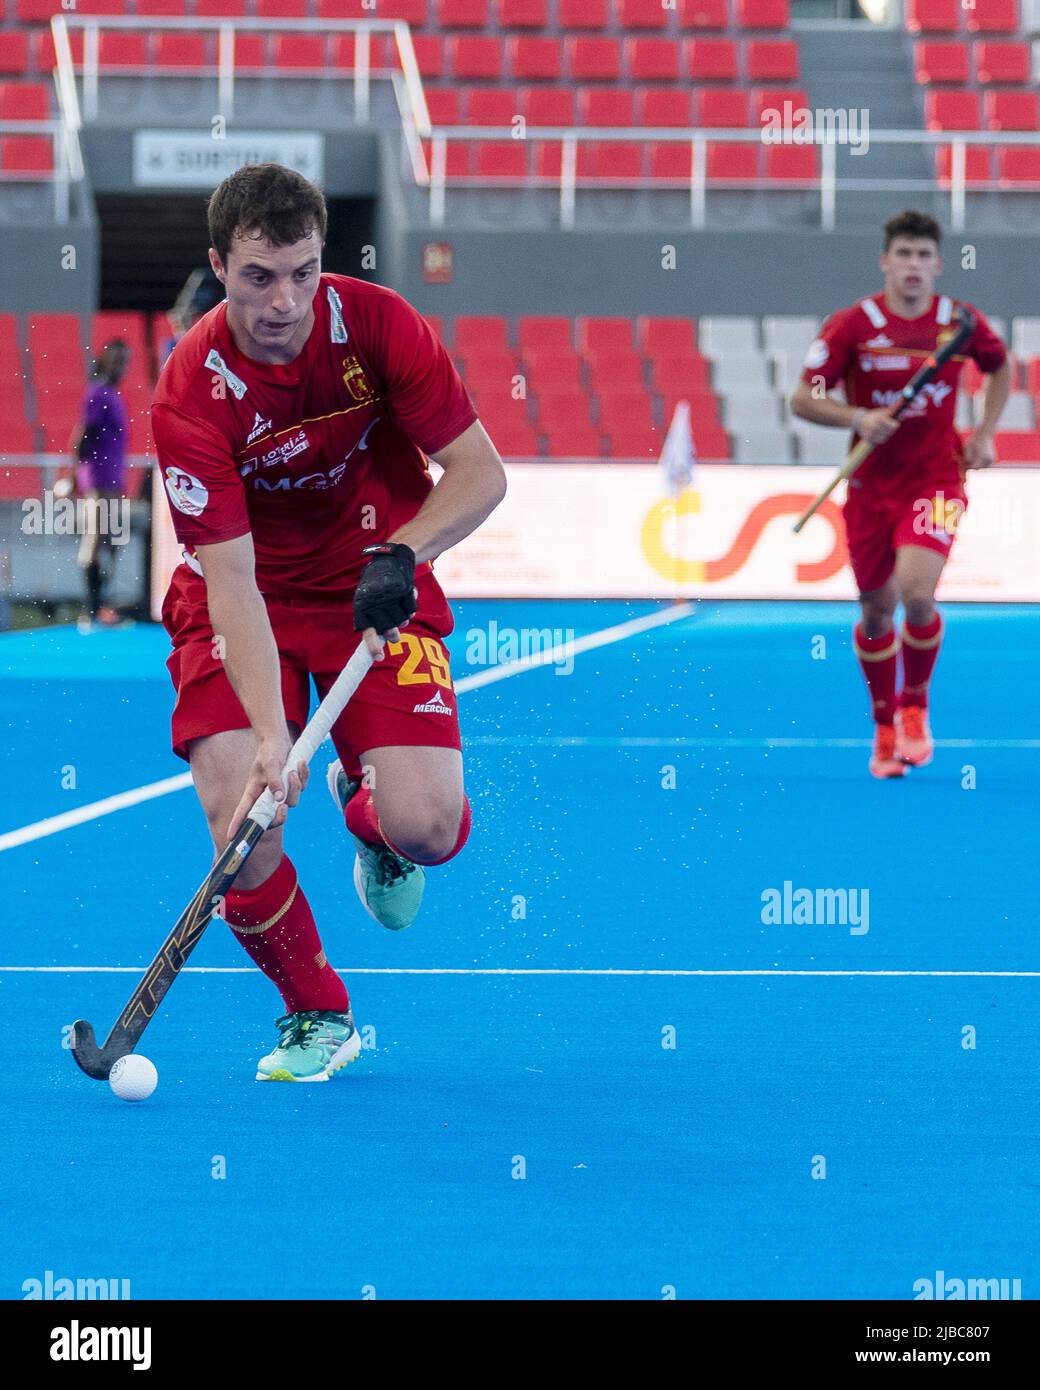 Gerard Clapes of Spain   during the FIH Pro League match between Spain and South Africa played at Olimpic de Terrassa Stadium on June 4, 2022 in Terassa, Spain. (Photo by Laura Barbany / PRESSINPHOTO) Stock Photo